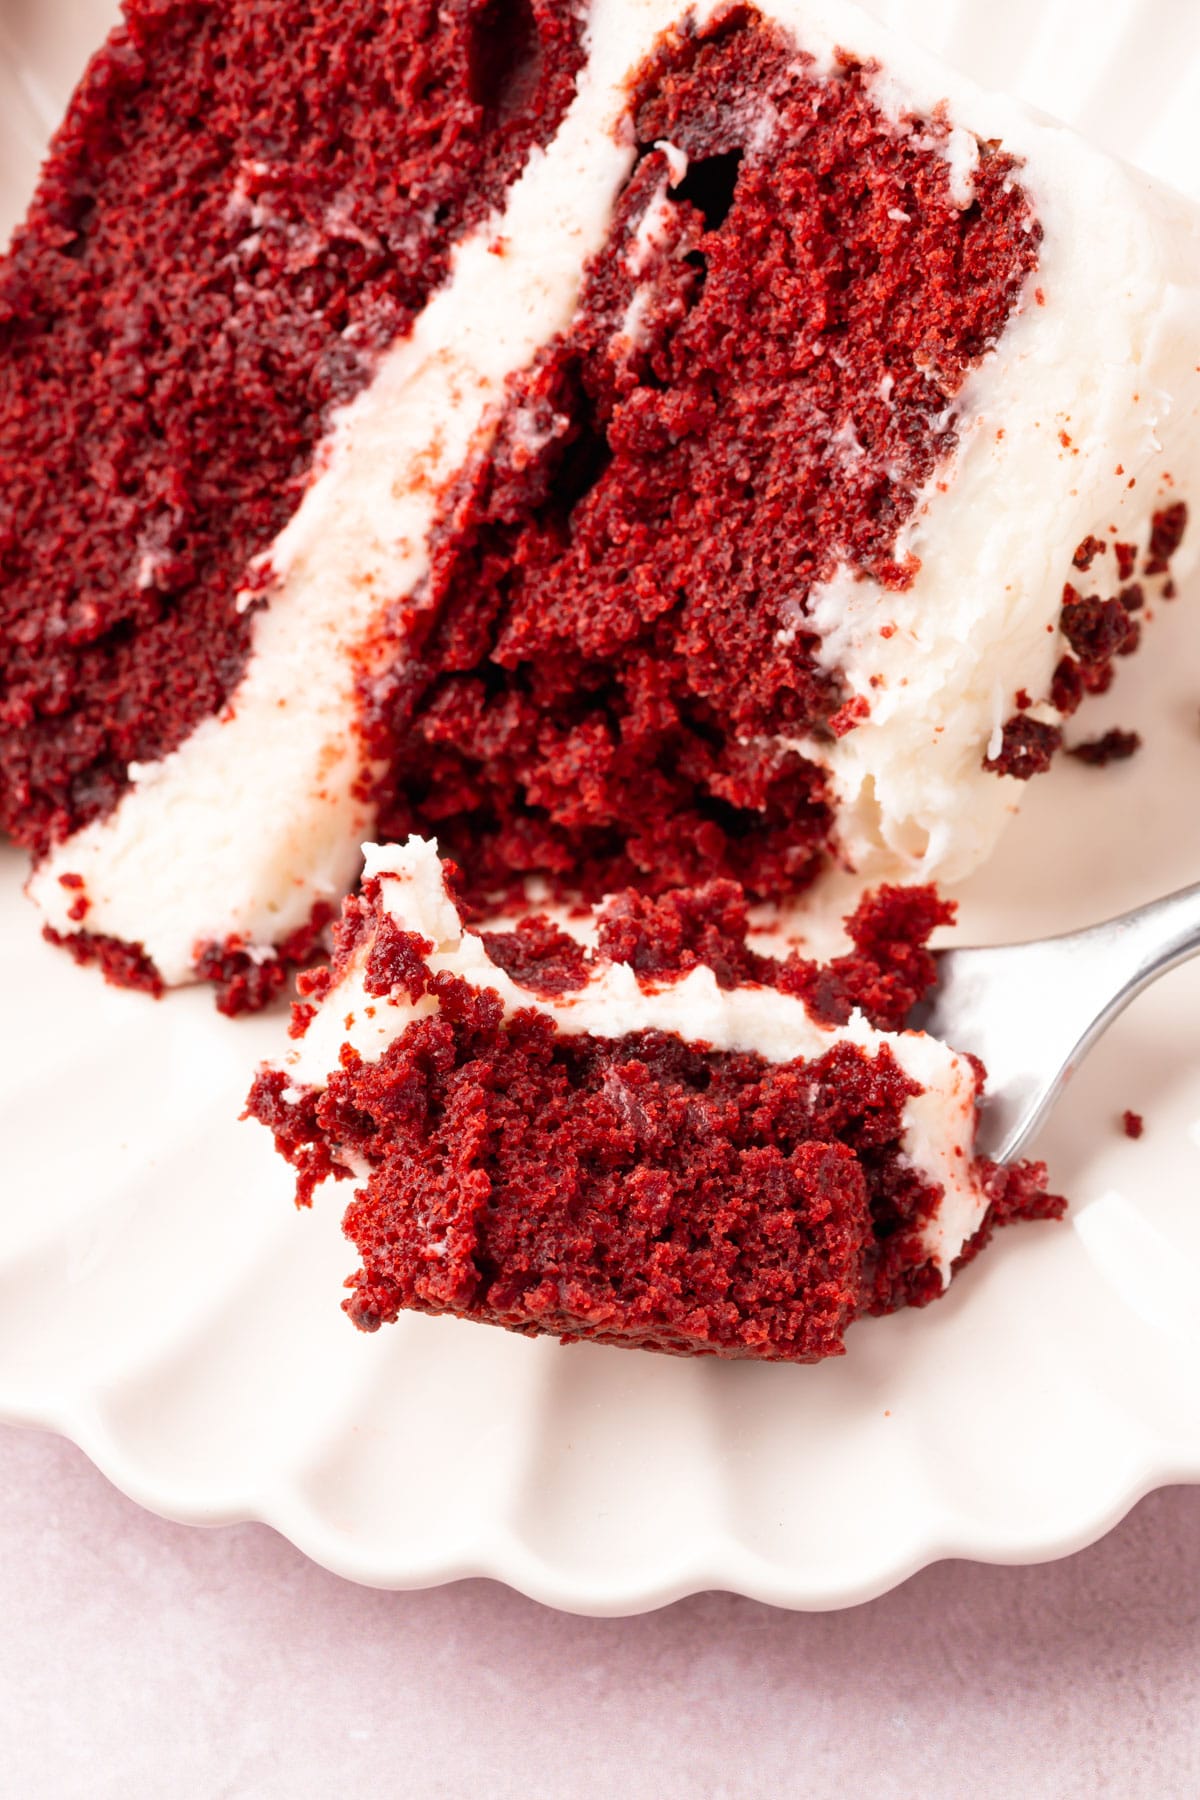 A piece of red velvet cake on a plate with a fork digging into the cake.